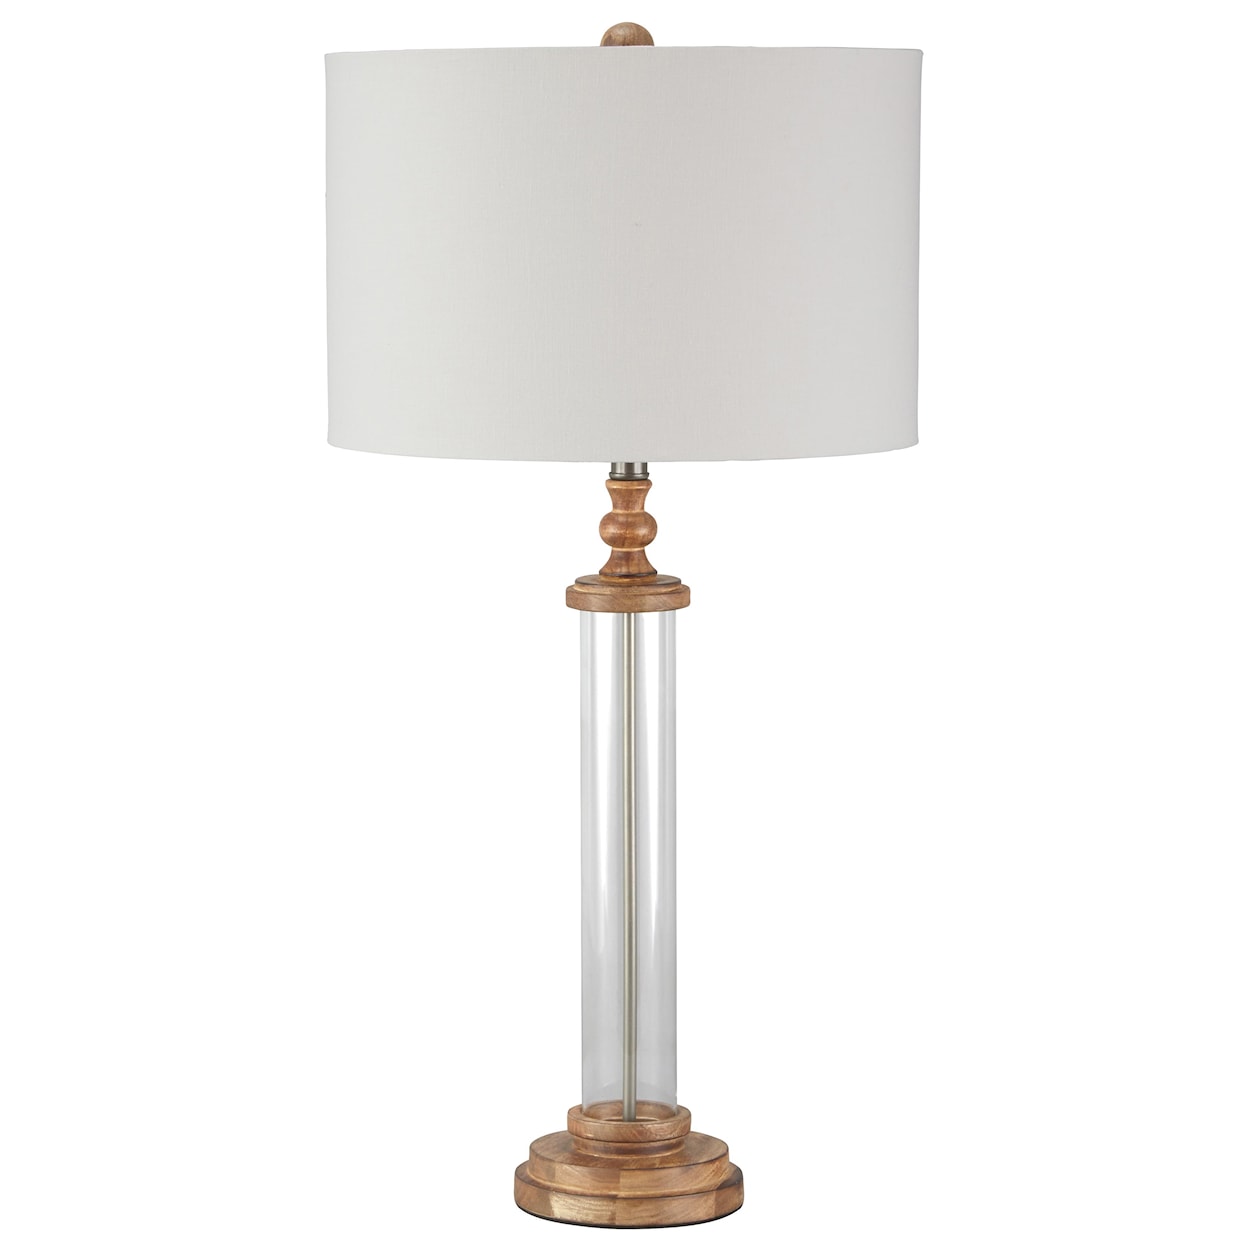 Signature Design by Ashley Lamps - Vintage Style Tabby Glass Table Lamp